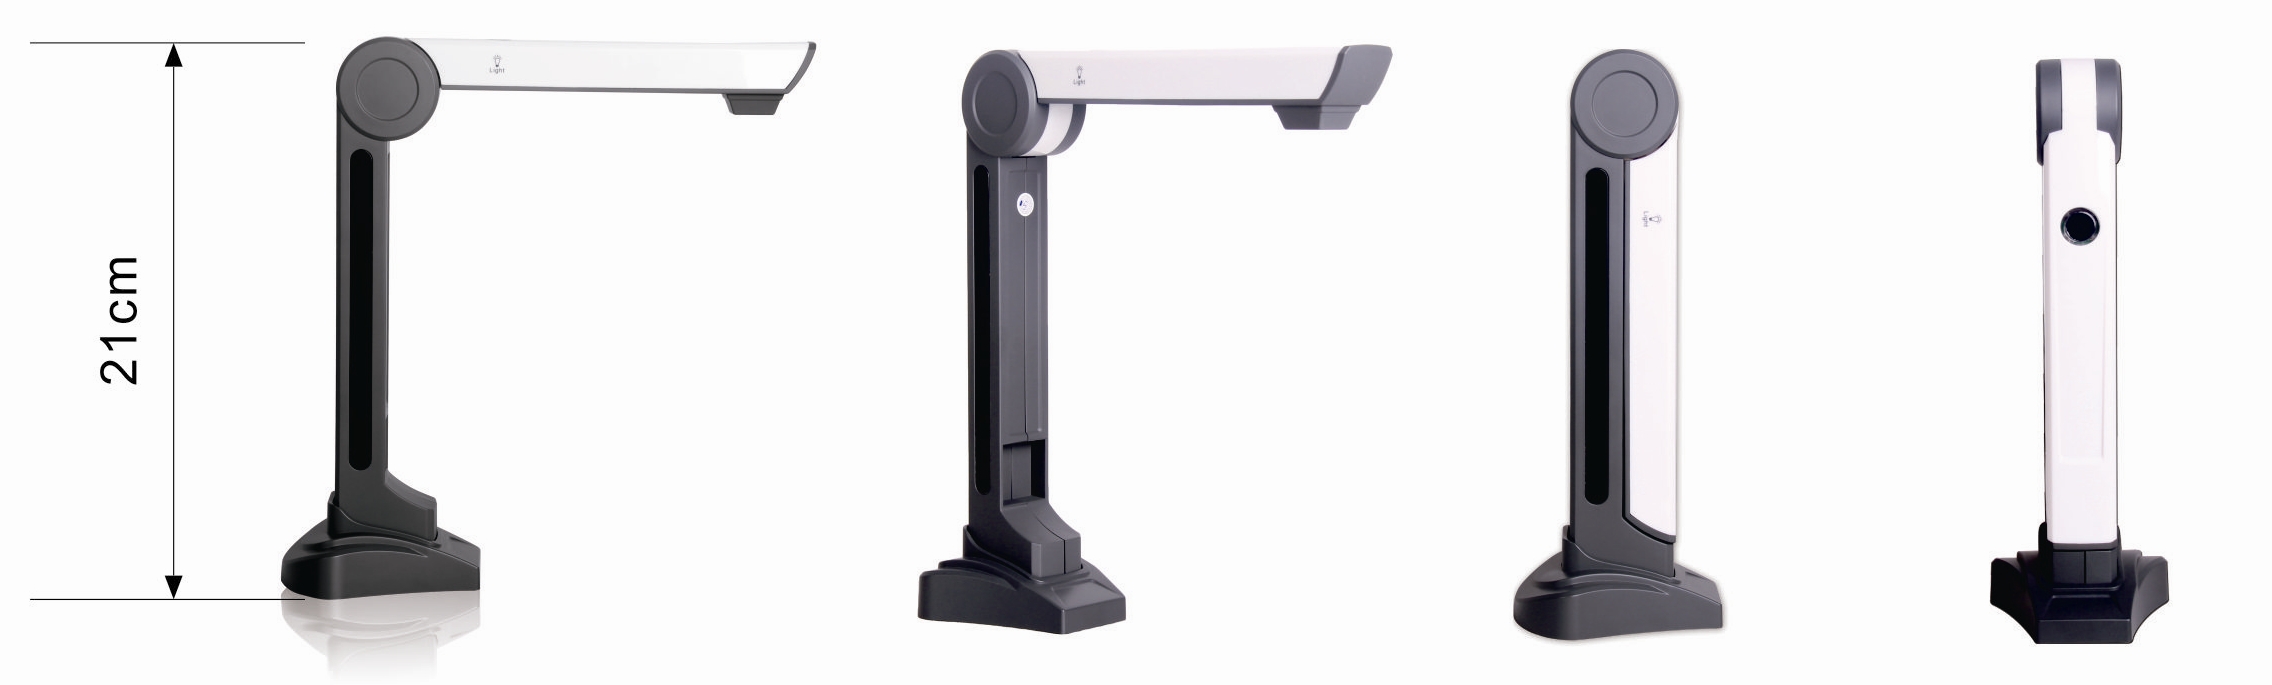 lowest height document scanner